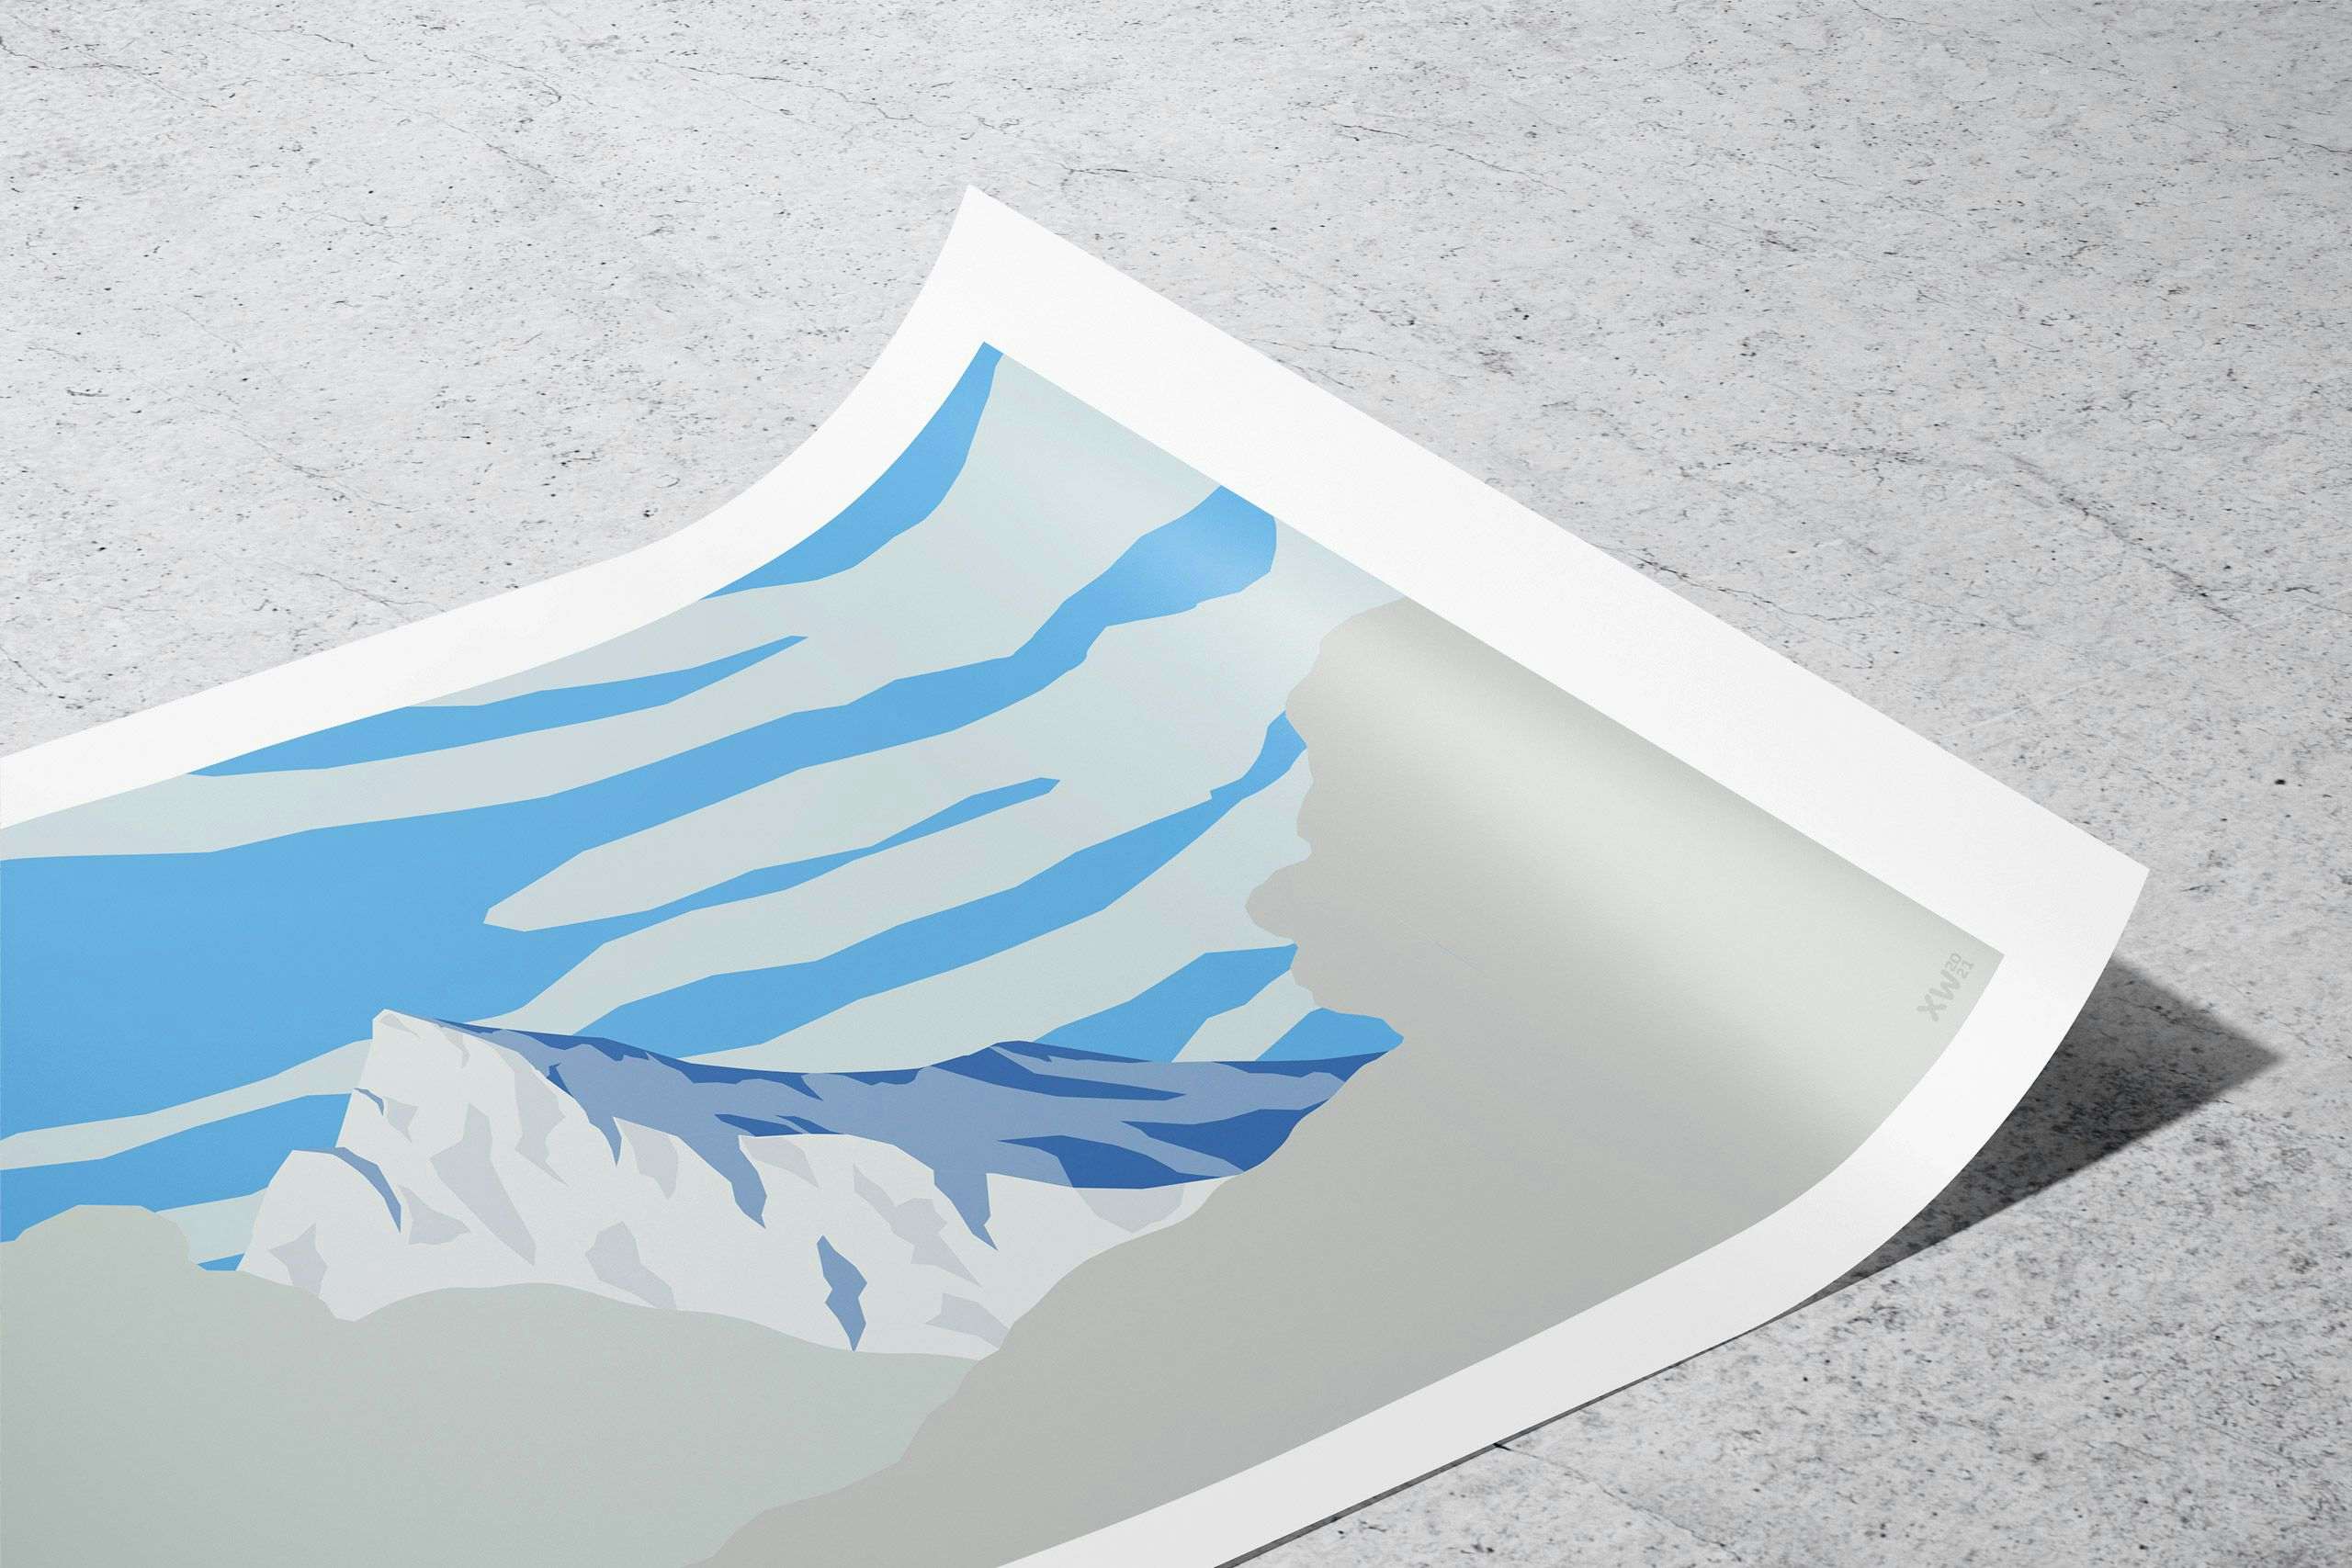 Winter views of Mont Charvin from Les Saisies. Minimalist mountain art by Xavier Wendling.